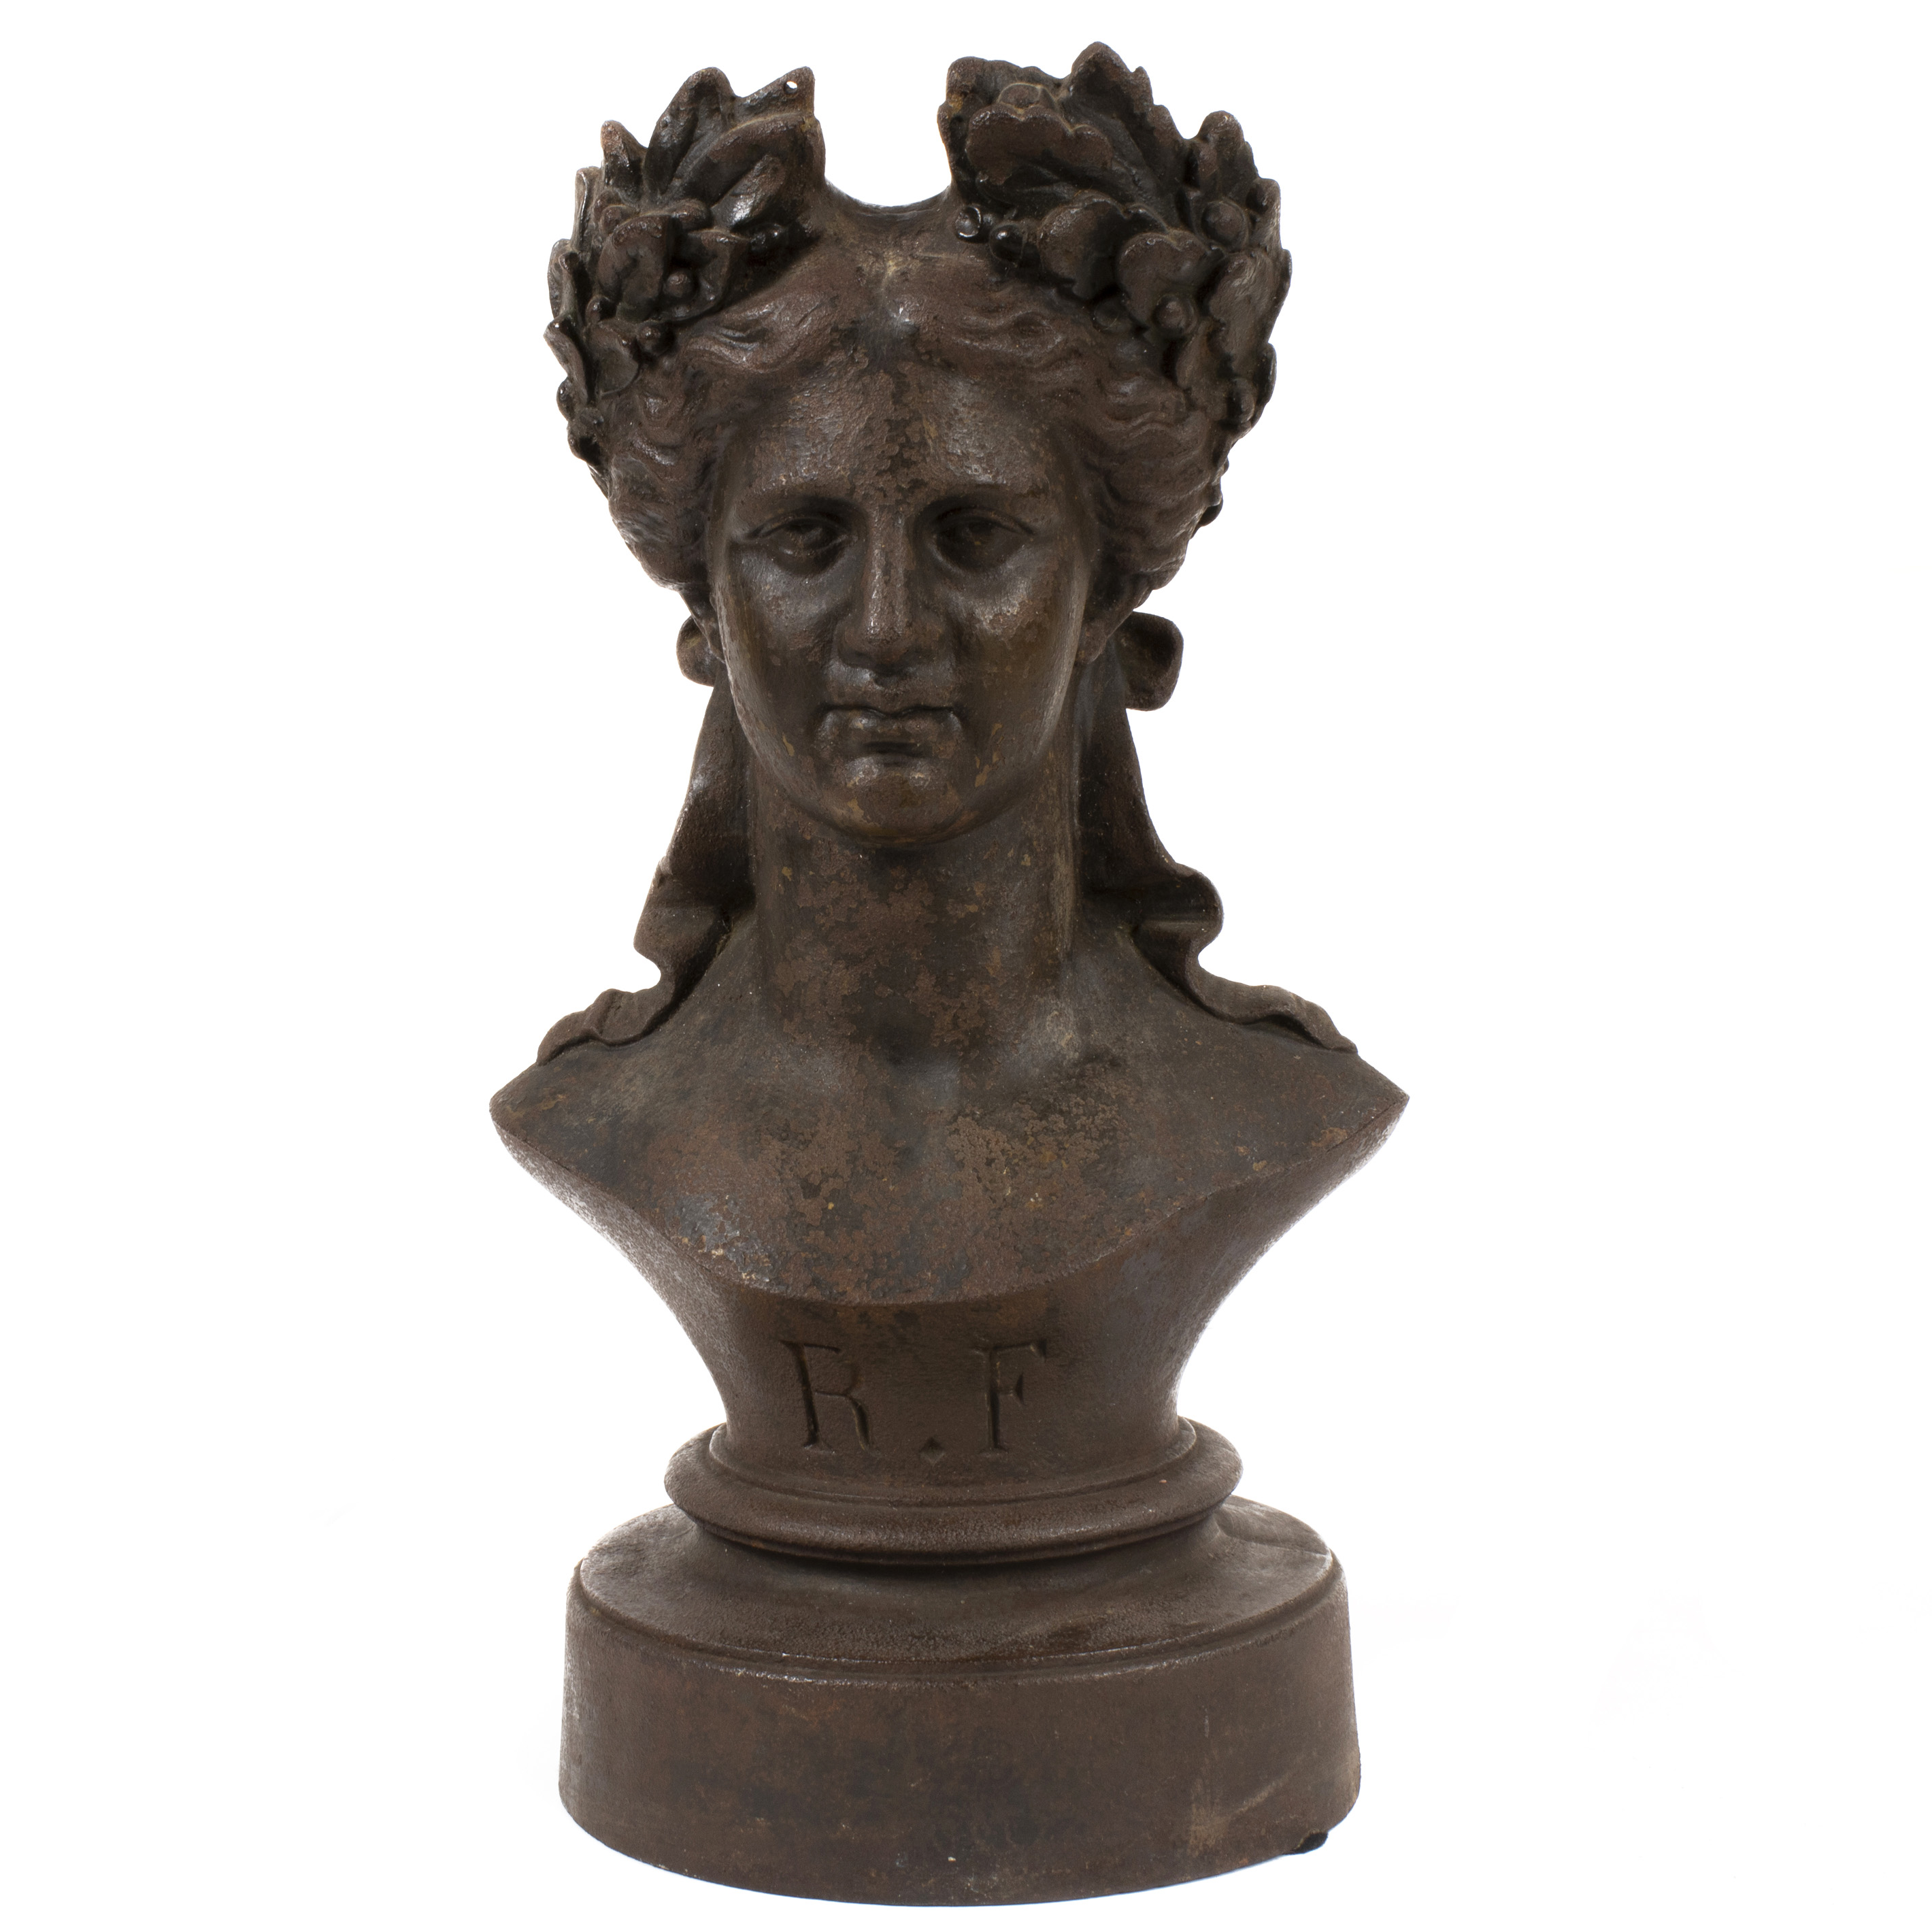 A GRAND TOUR STYLE IRON BUST DEPICTING 3a46b5